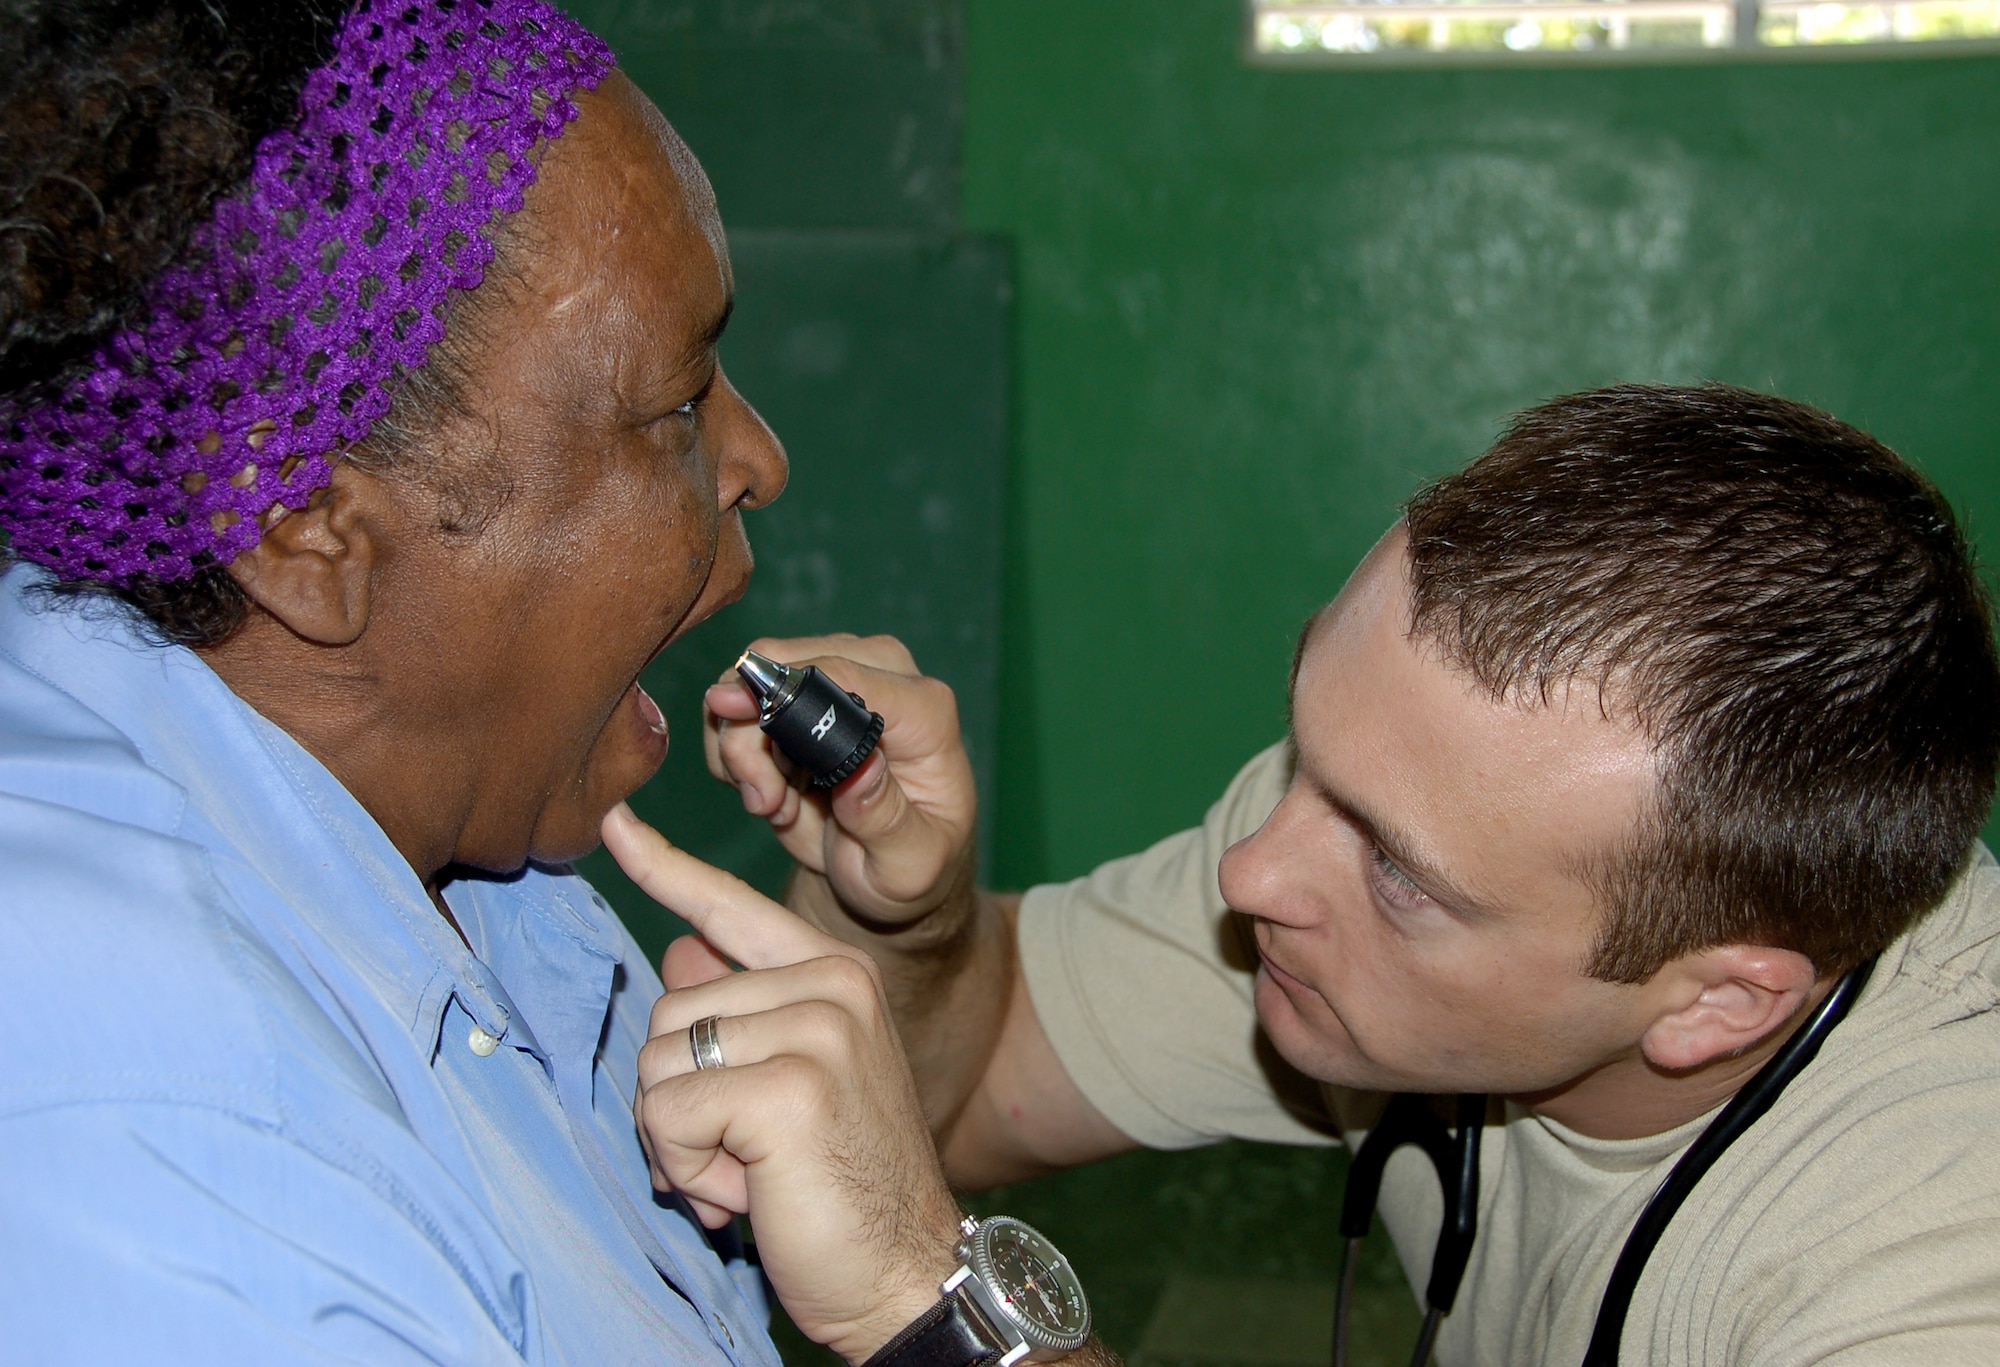 1st Lt. John A. Vann performs an examination on a patient at a primary school turned temporary clinic April 22 in Hostos, Dom. Rep., during the medical readiness exercise, Beyond the Horizon 2009 - Caribbean. The medics treated 2,800 patients during the first three days of the U.S. Southern Command sponsored MEDRETE. Lieutenant Vann is a physician assistant from the 42nd Medical Group at Maxwell AFB, Ala. (U.S. Air Force photo/Capt. Ben Sakrisson) 